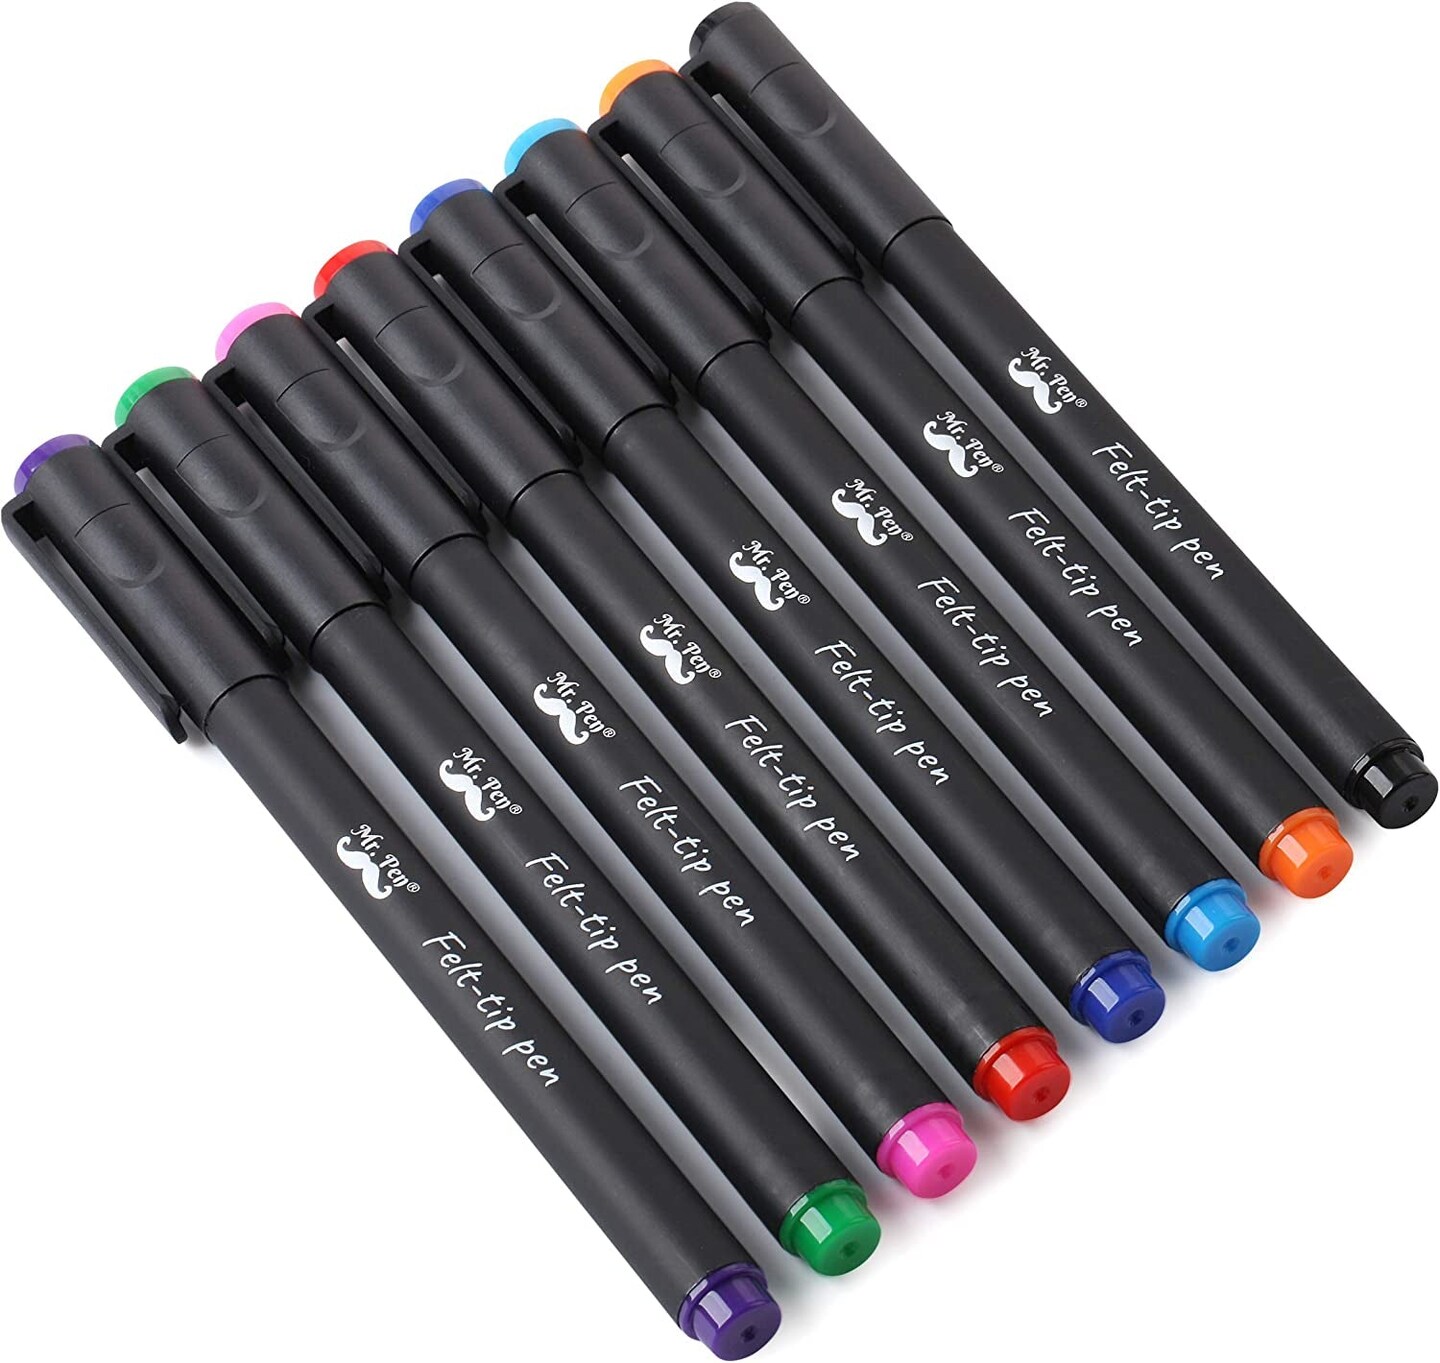  Mr. Pen- Felt Tip Pens, Pens Fine Point, Pack of 8, Fast Dry,  No Smear, Colored Pens, Journaling Pens, Felt Pens, Planner Markers,  Planner Pens, Christmas Gift : Office Products